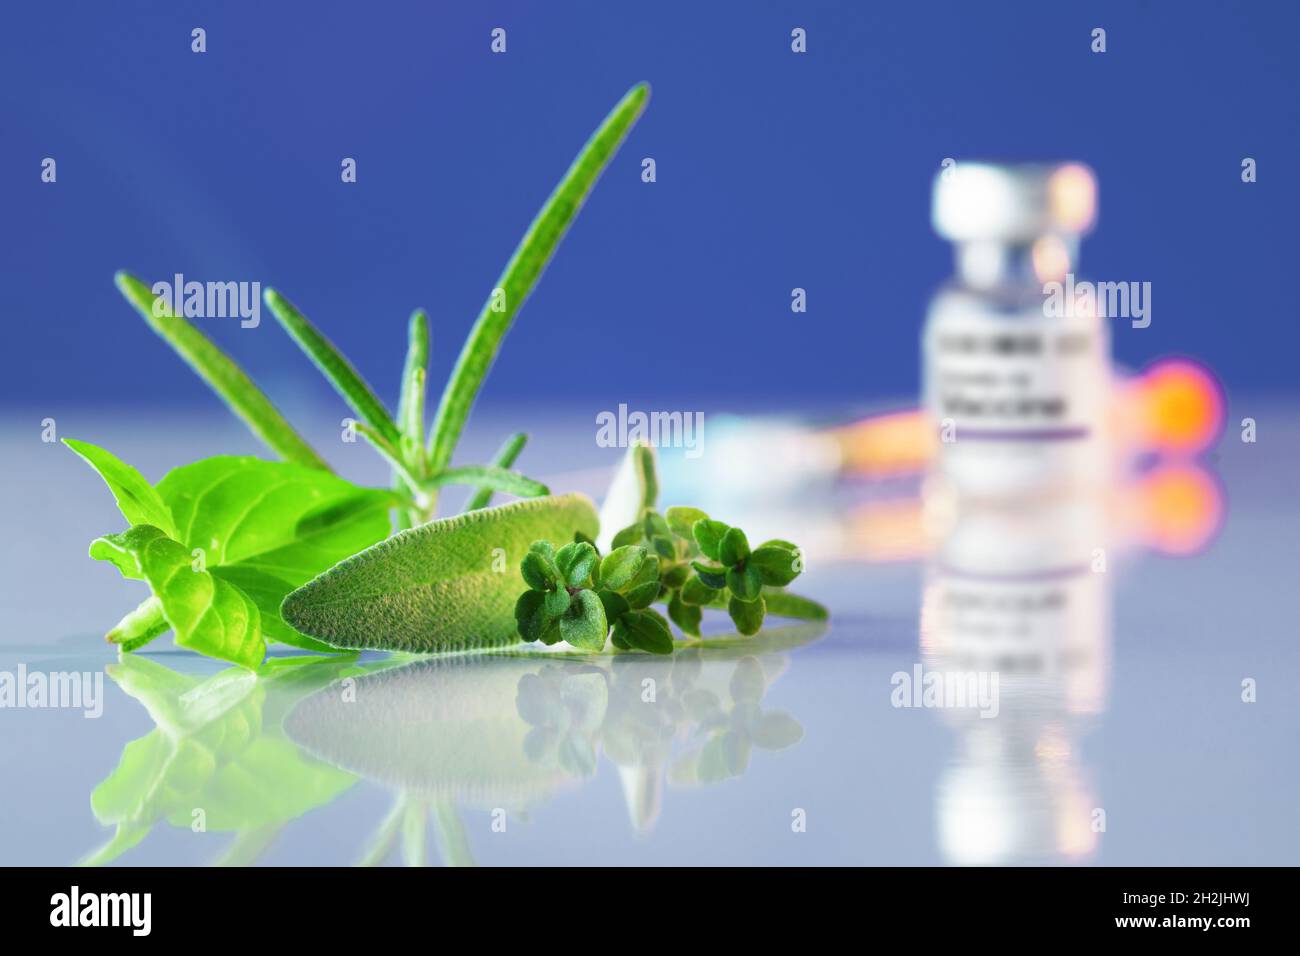 Close-up of herbs as an alternative medicine, COVID-19 vaccine vial and syringe in background. Alternative medicine, vaccination, Covid-19, pharmaceut Stock Photo